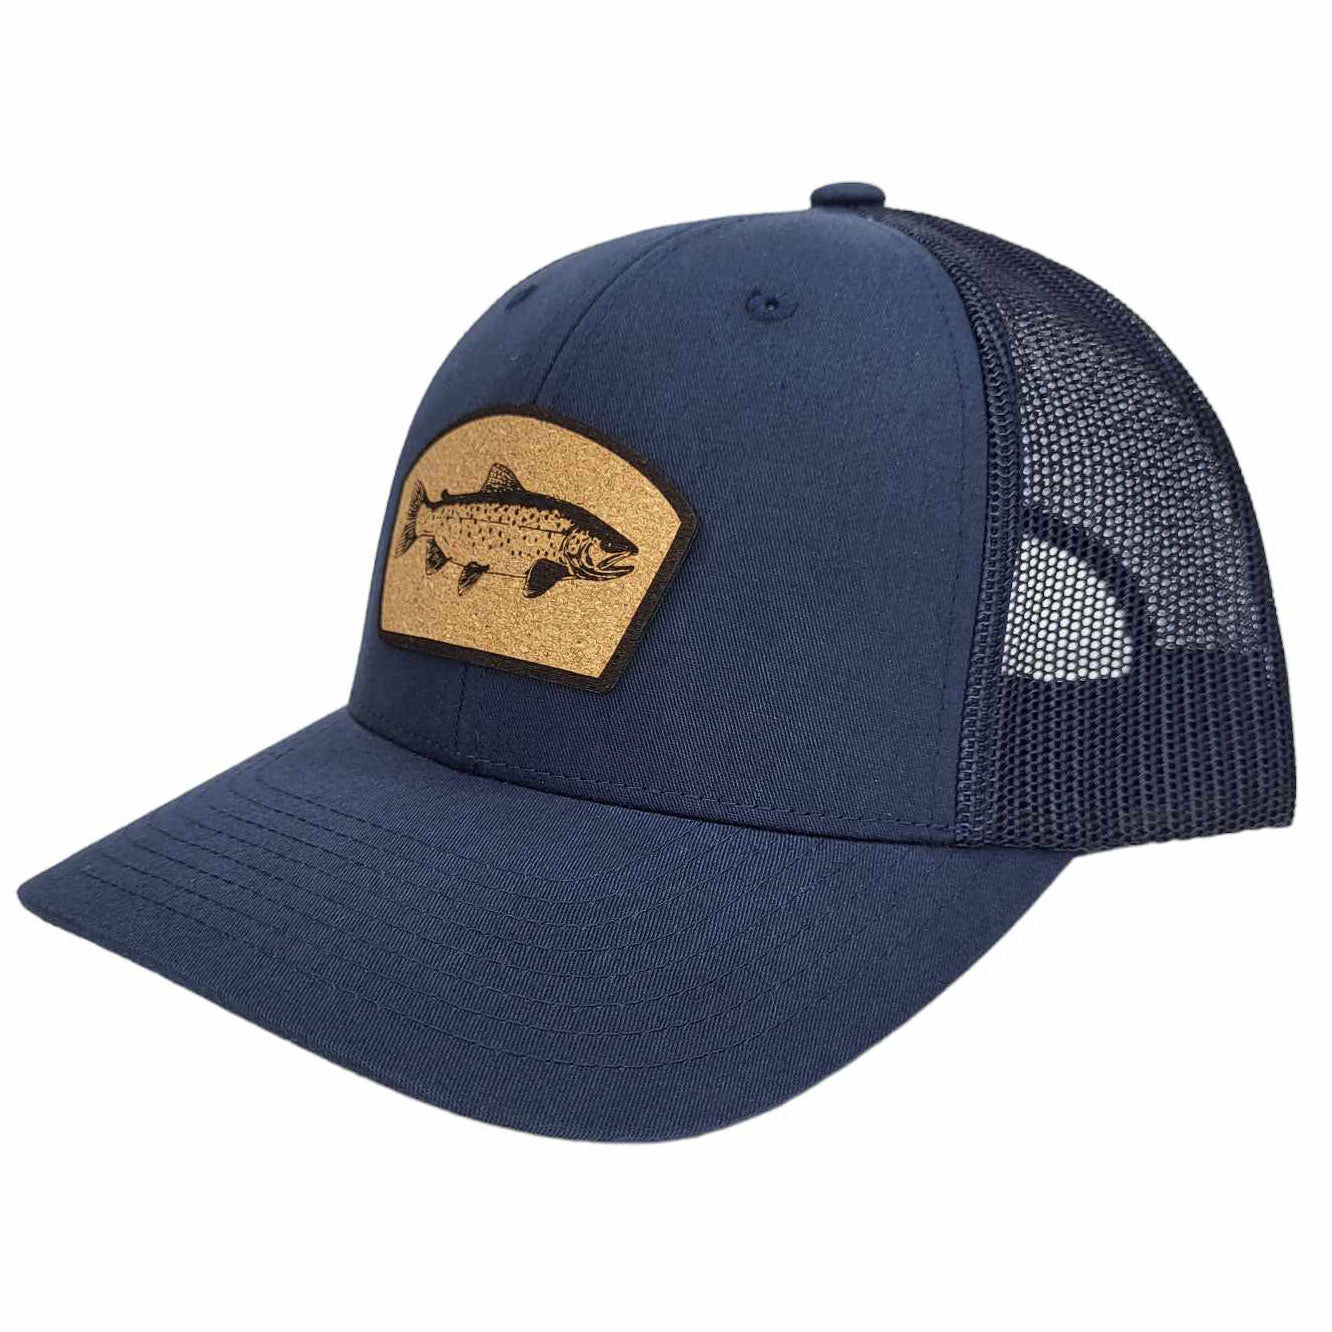 The Trout Fishing Hat